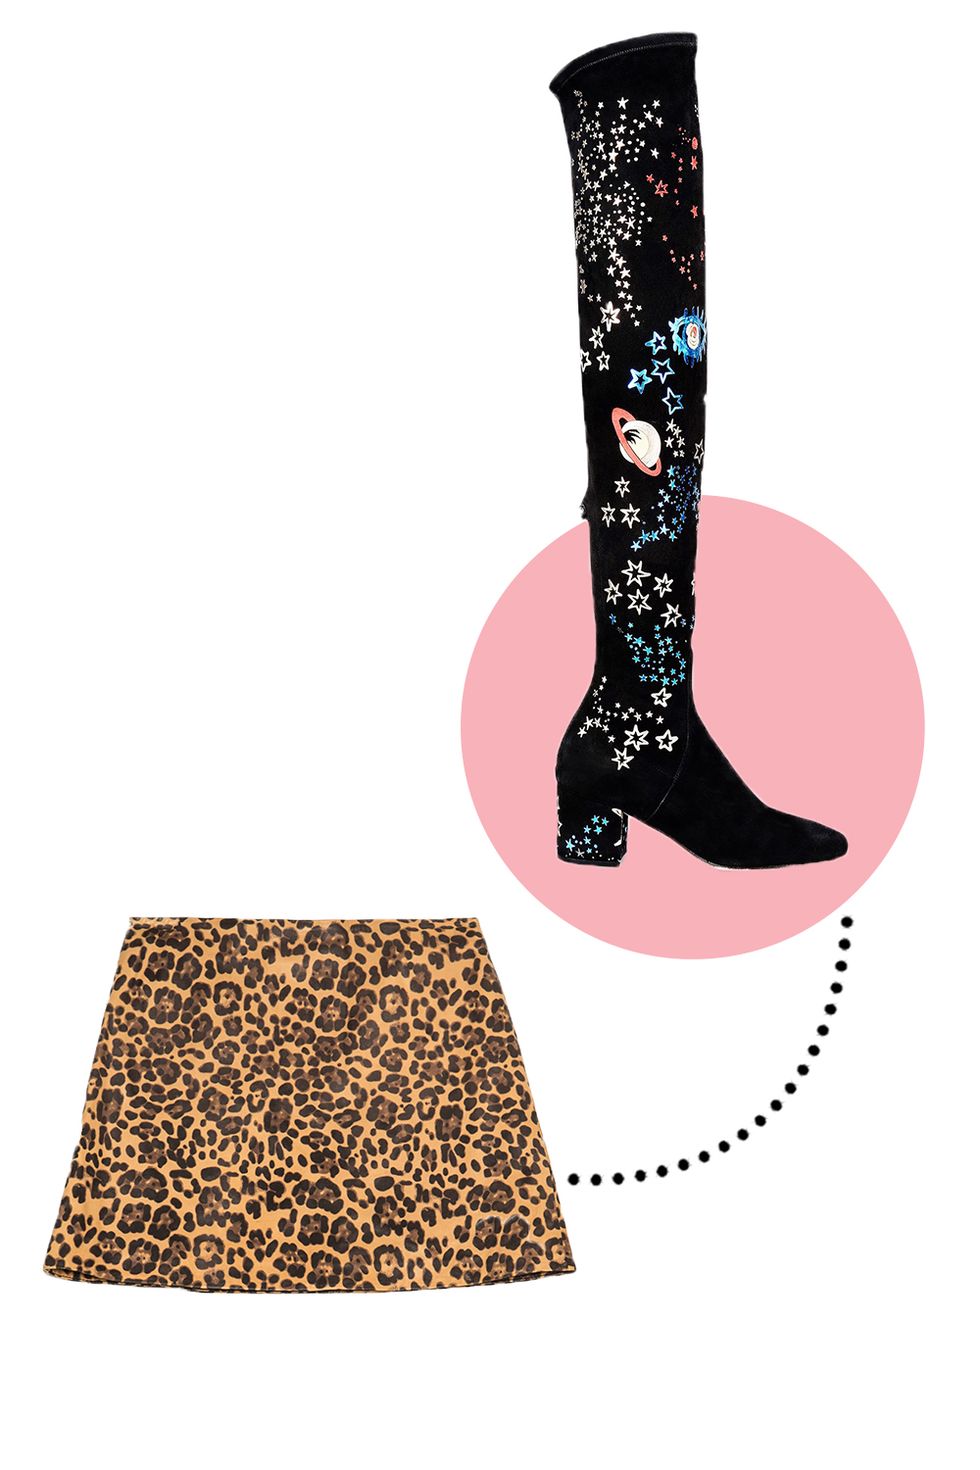 The Over the Knee Boots I Plan To Live in All Fall - Sydne Style